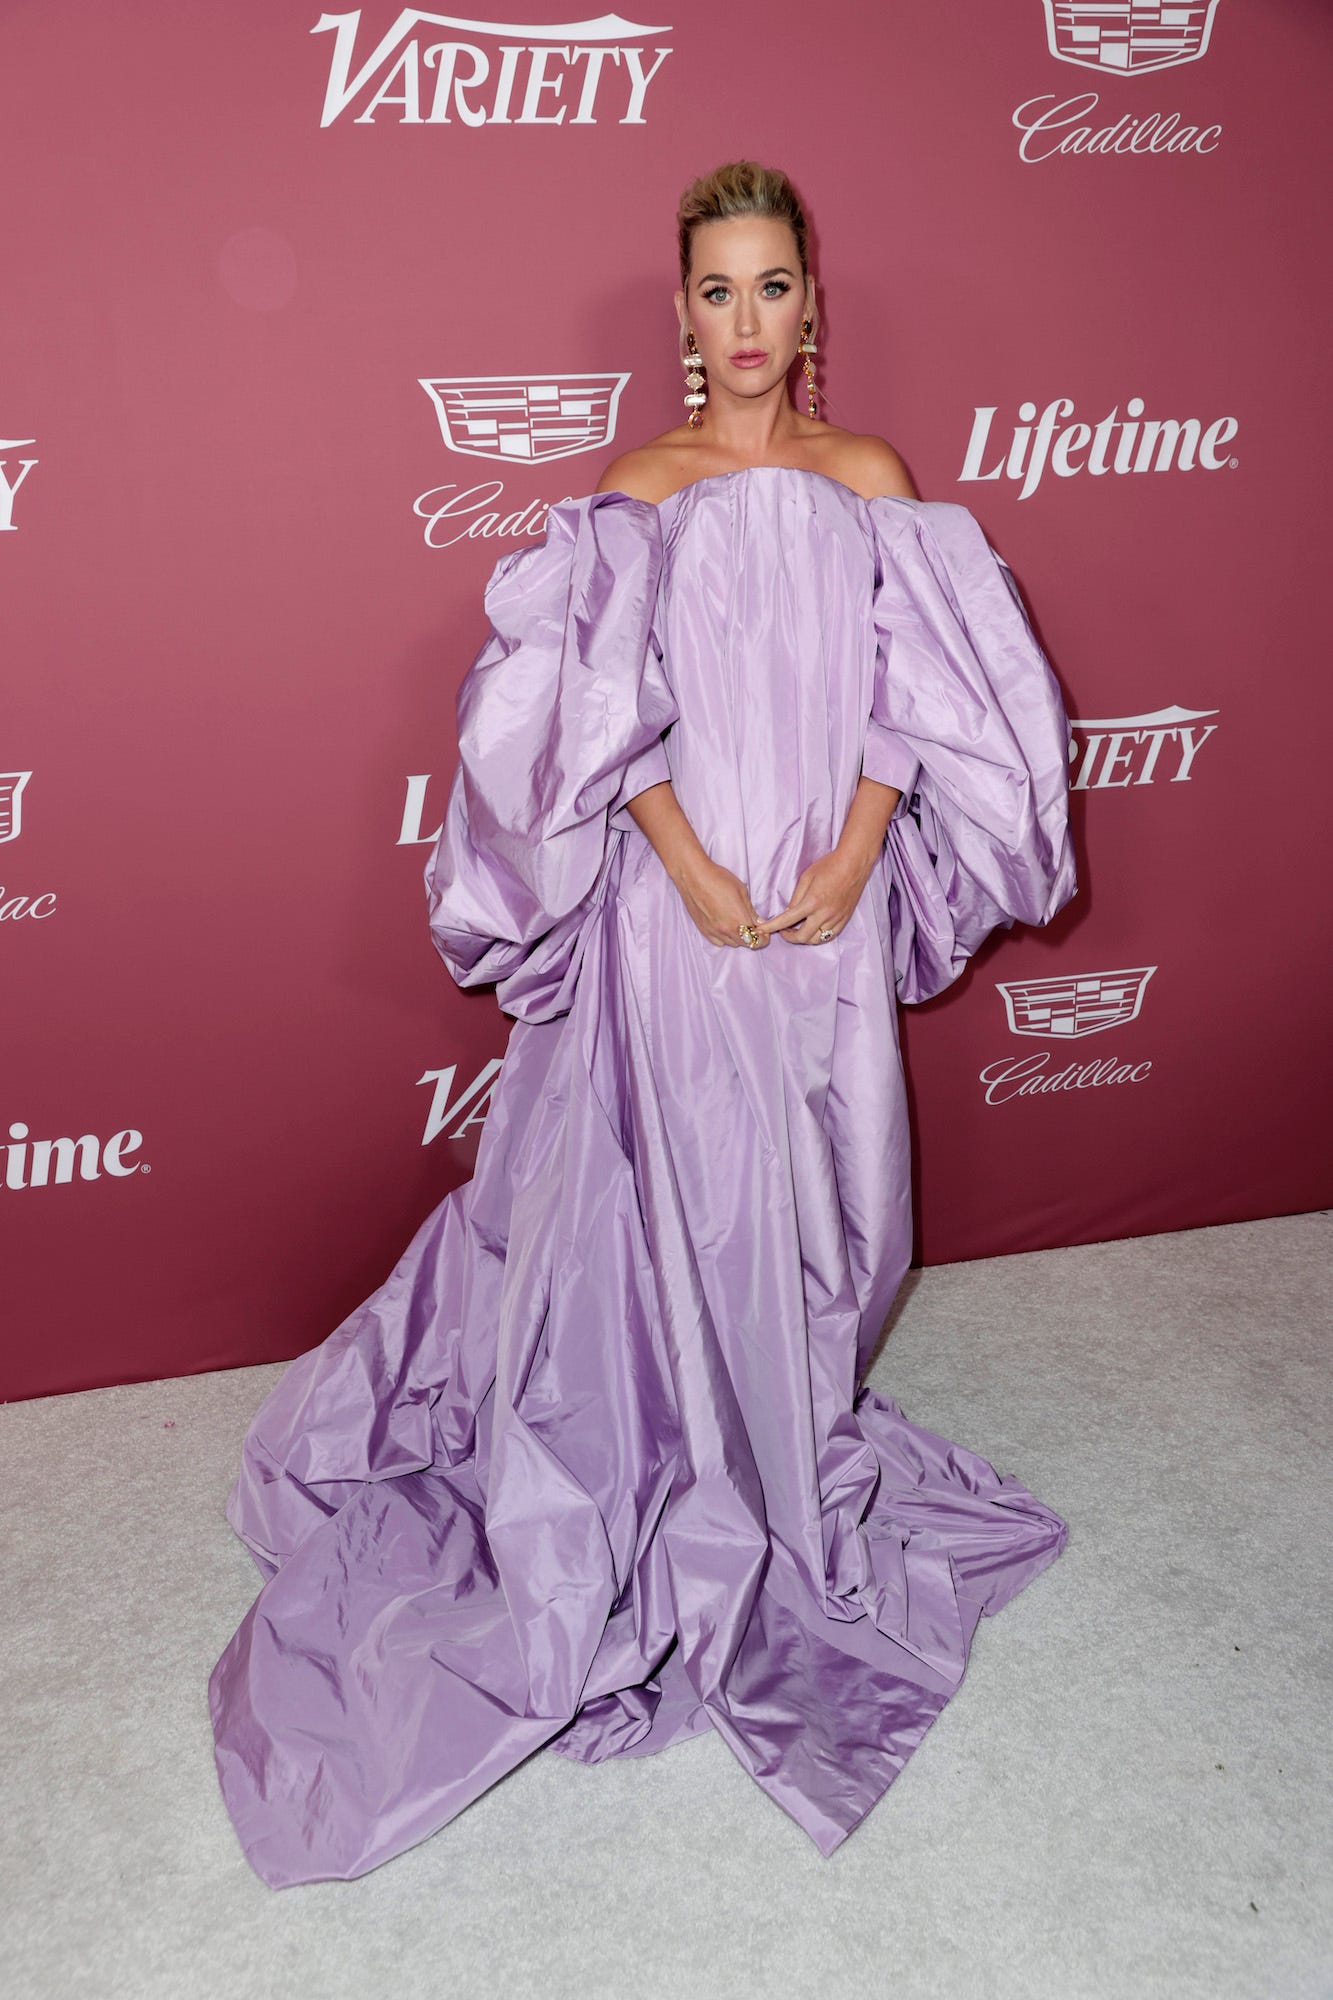 Katy Perry at Variety's 2021 Power of Women event.